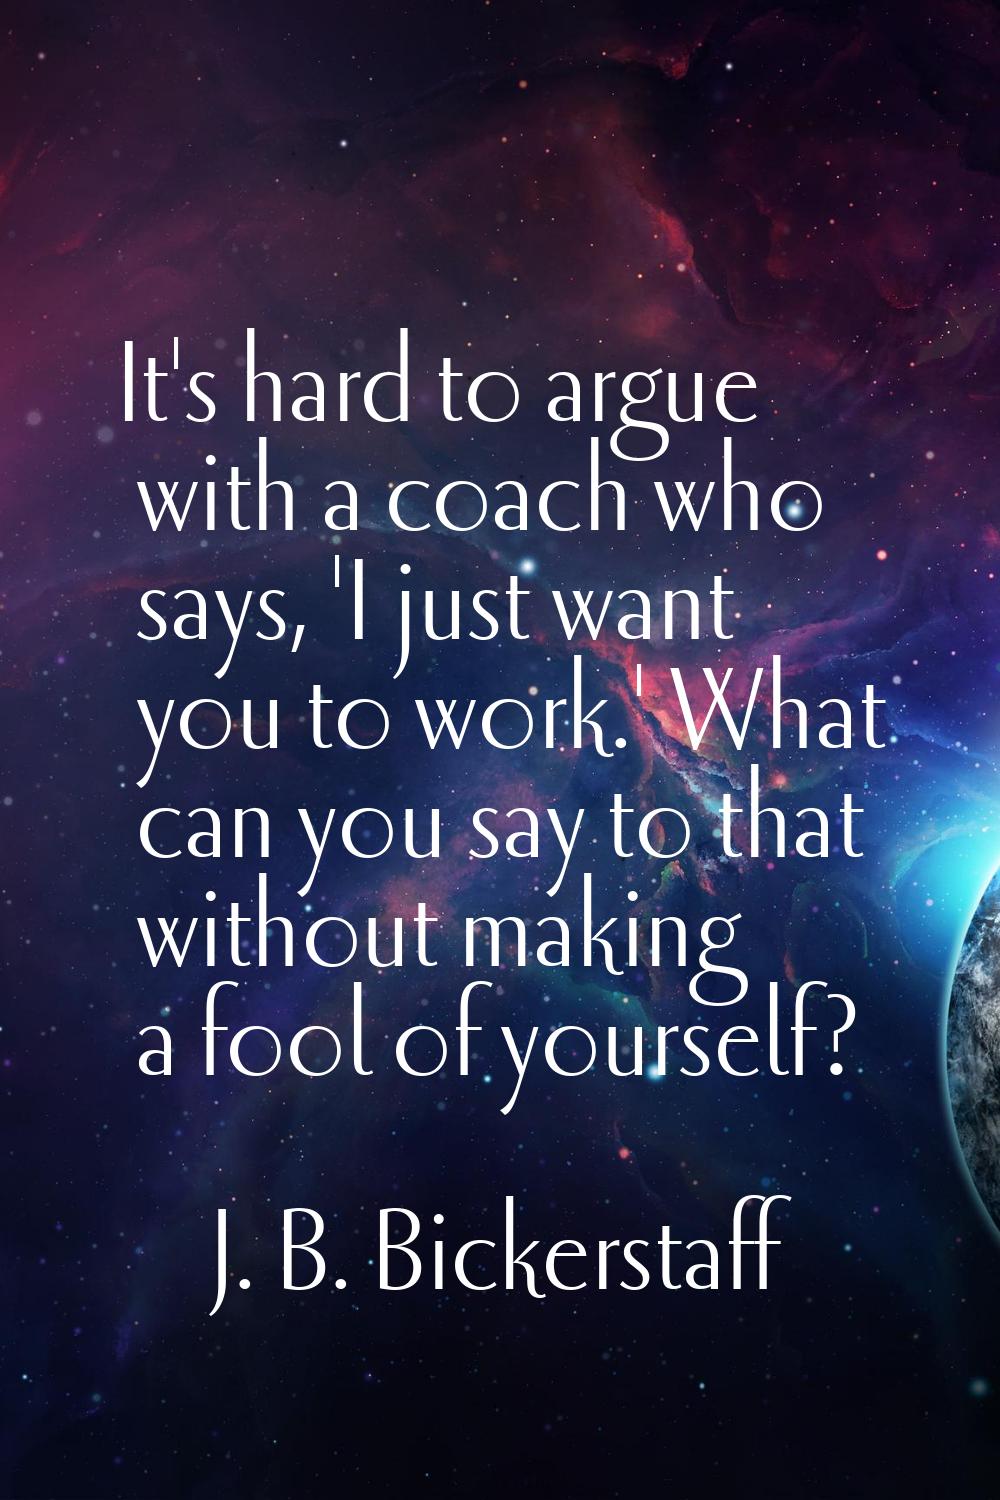 It's hard to argue with a coach who says, 'I just want you to work.' What can you say to that witho